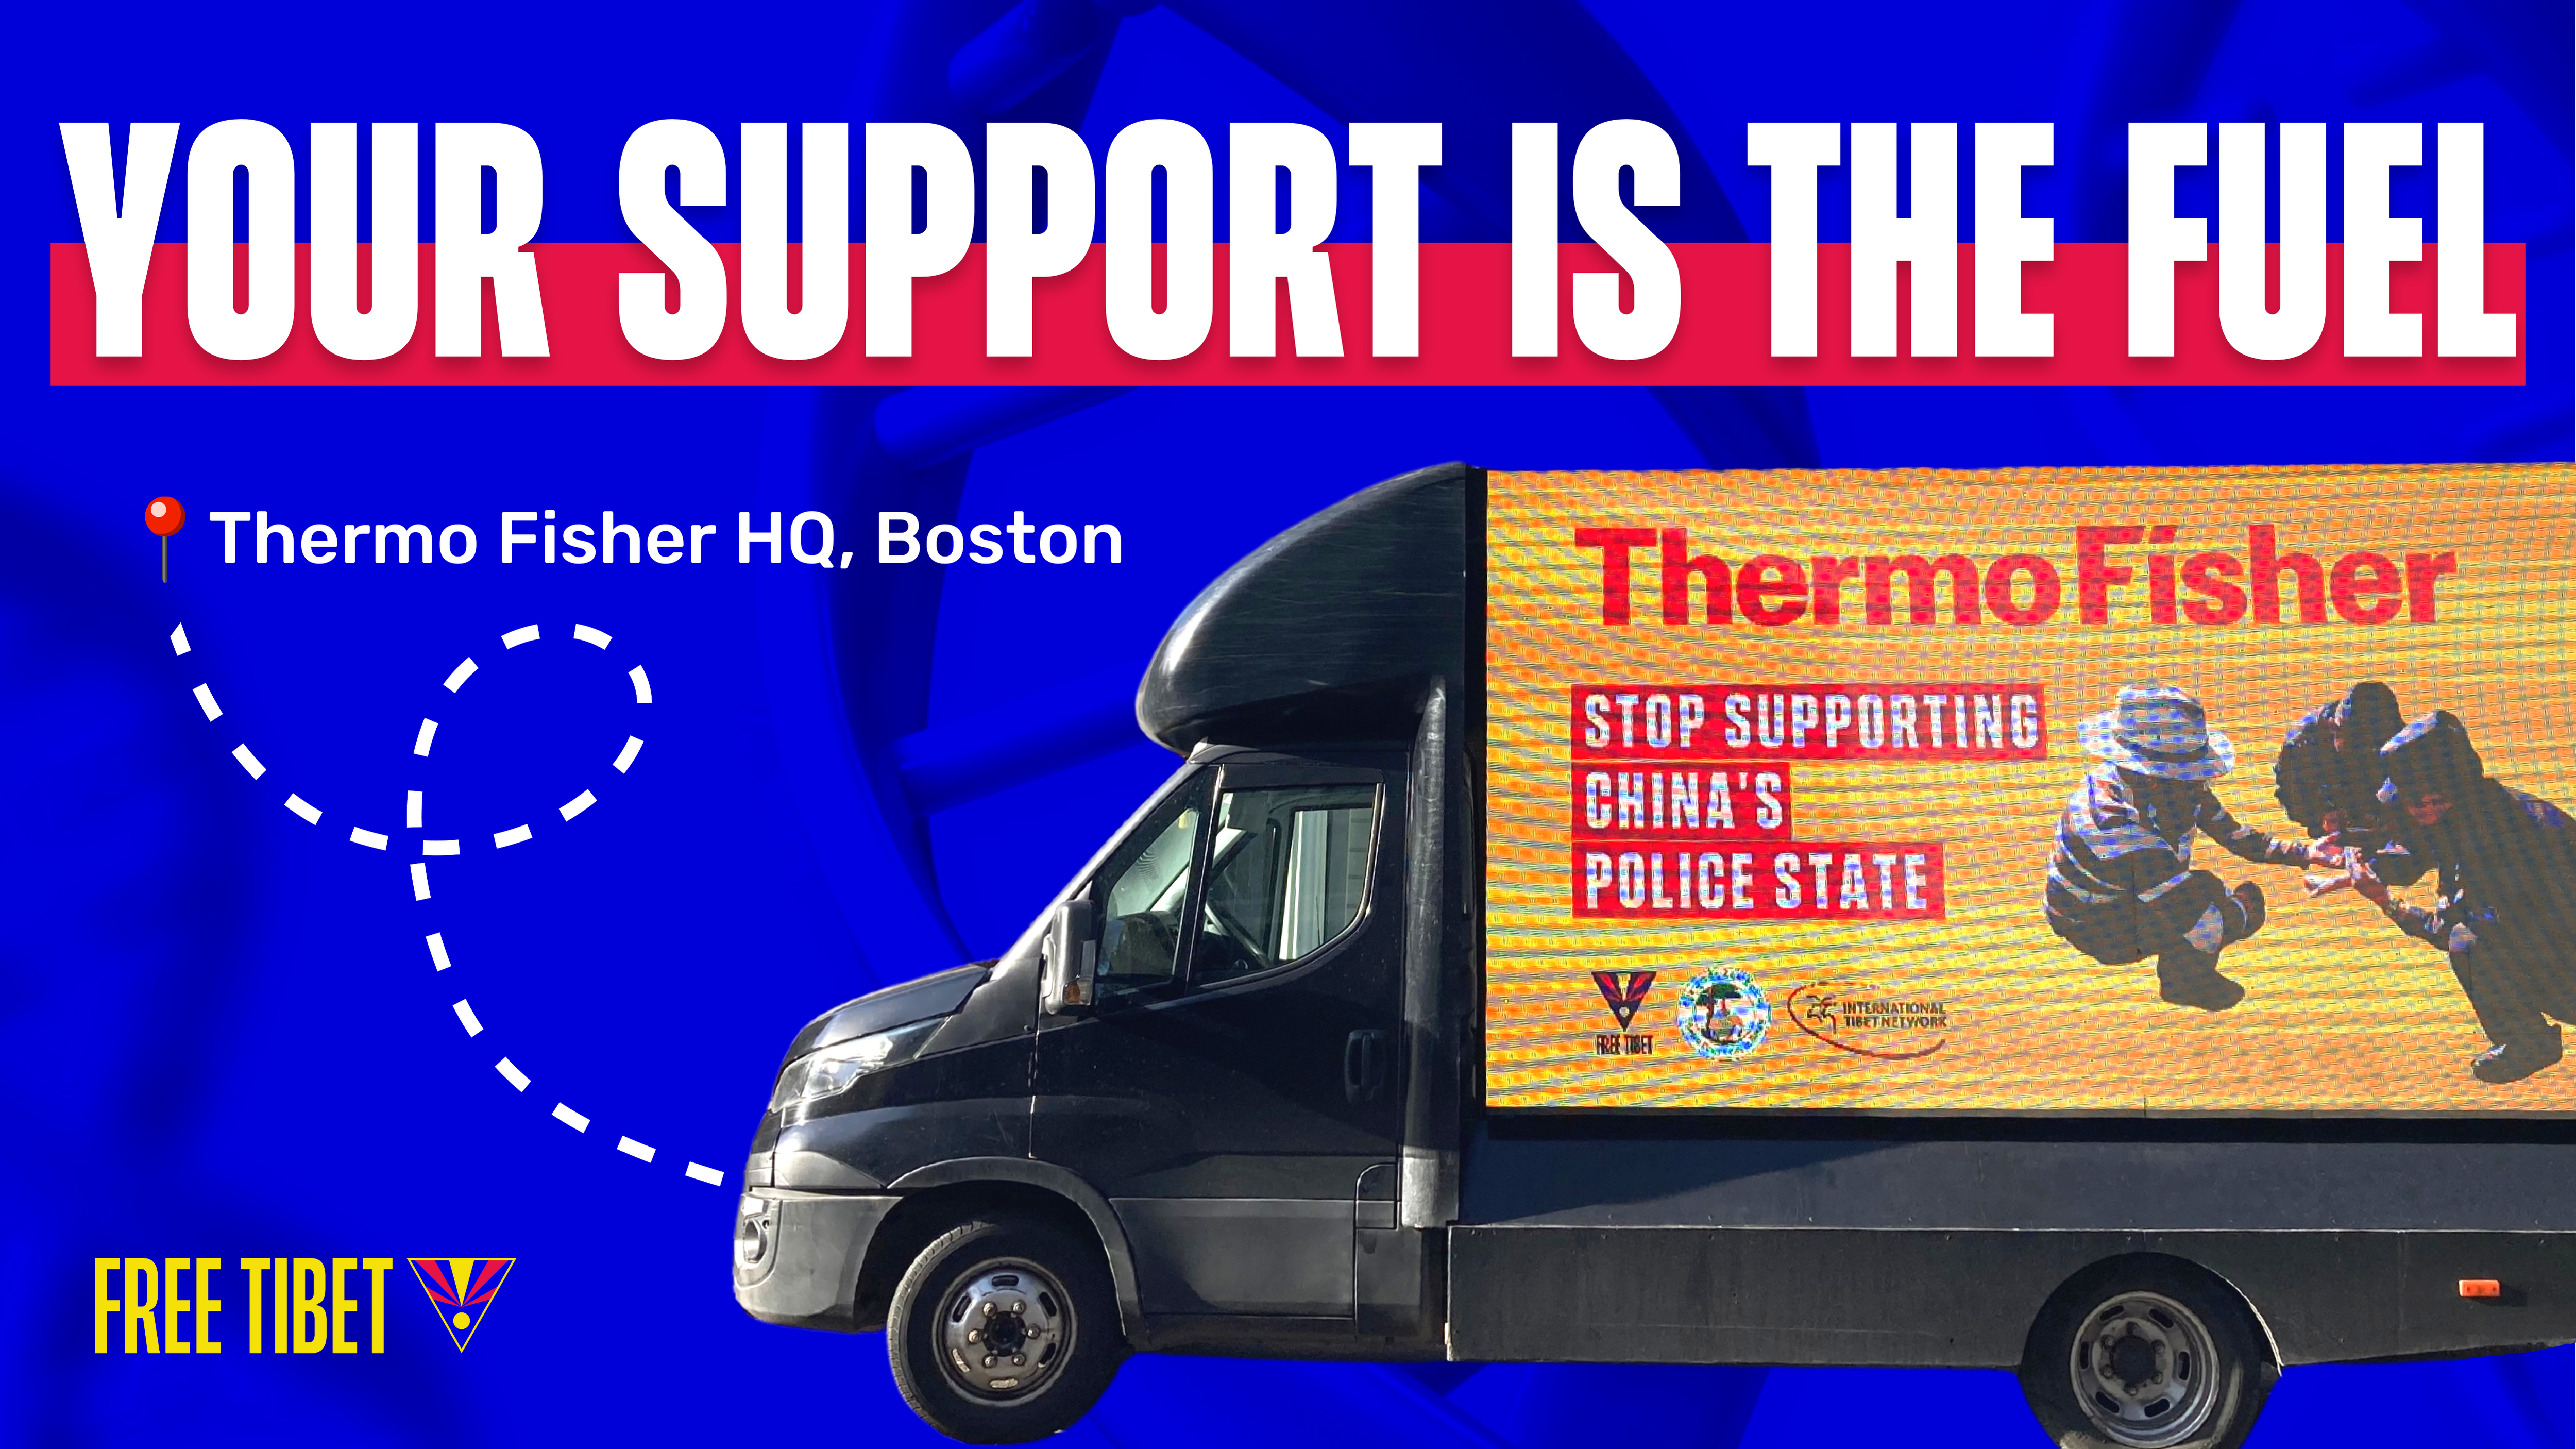 Image description: Graphic text reads "Your support is the fuel". An illustration of Free Tibet's ad van from the Global Week of Action against Thermo Fisher, journeying to their HQ in Boston.